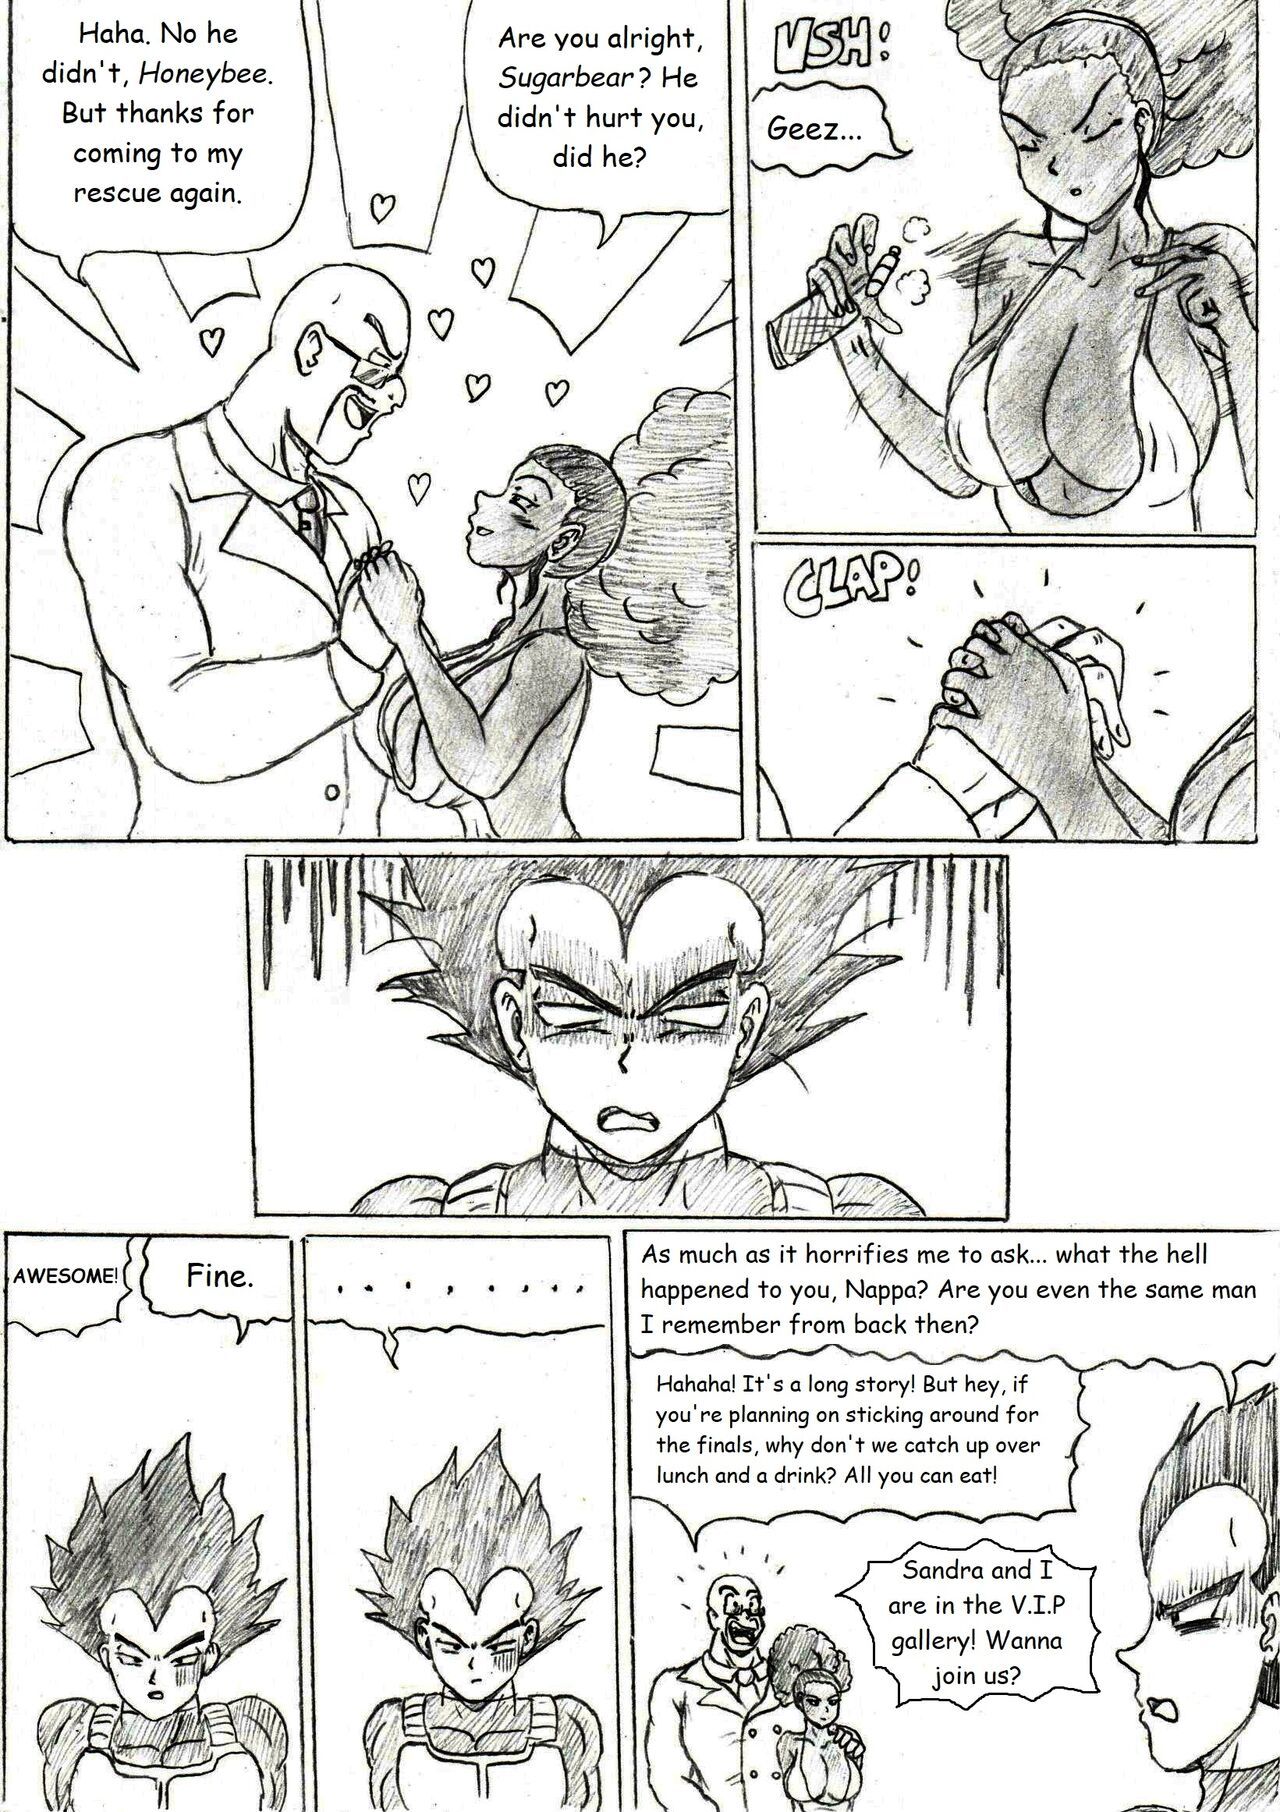 [TheWriteFiction] Dragonball Z Golden Age - Chapter 4 - The Galaxy Soldiers (Ongoing) 18